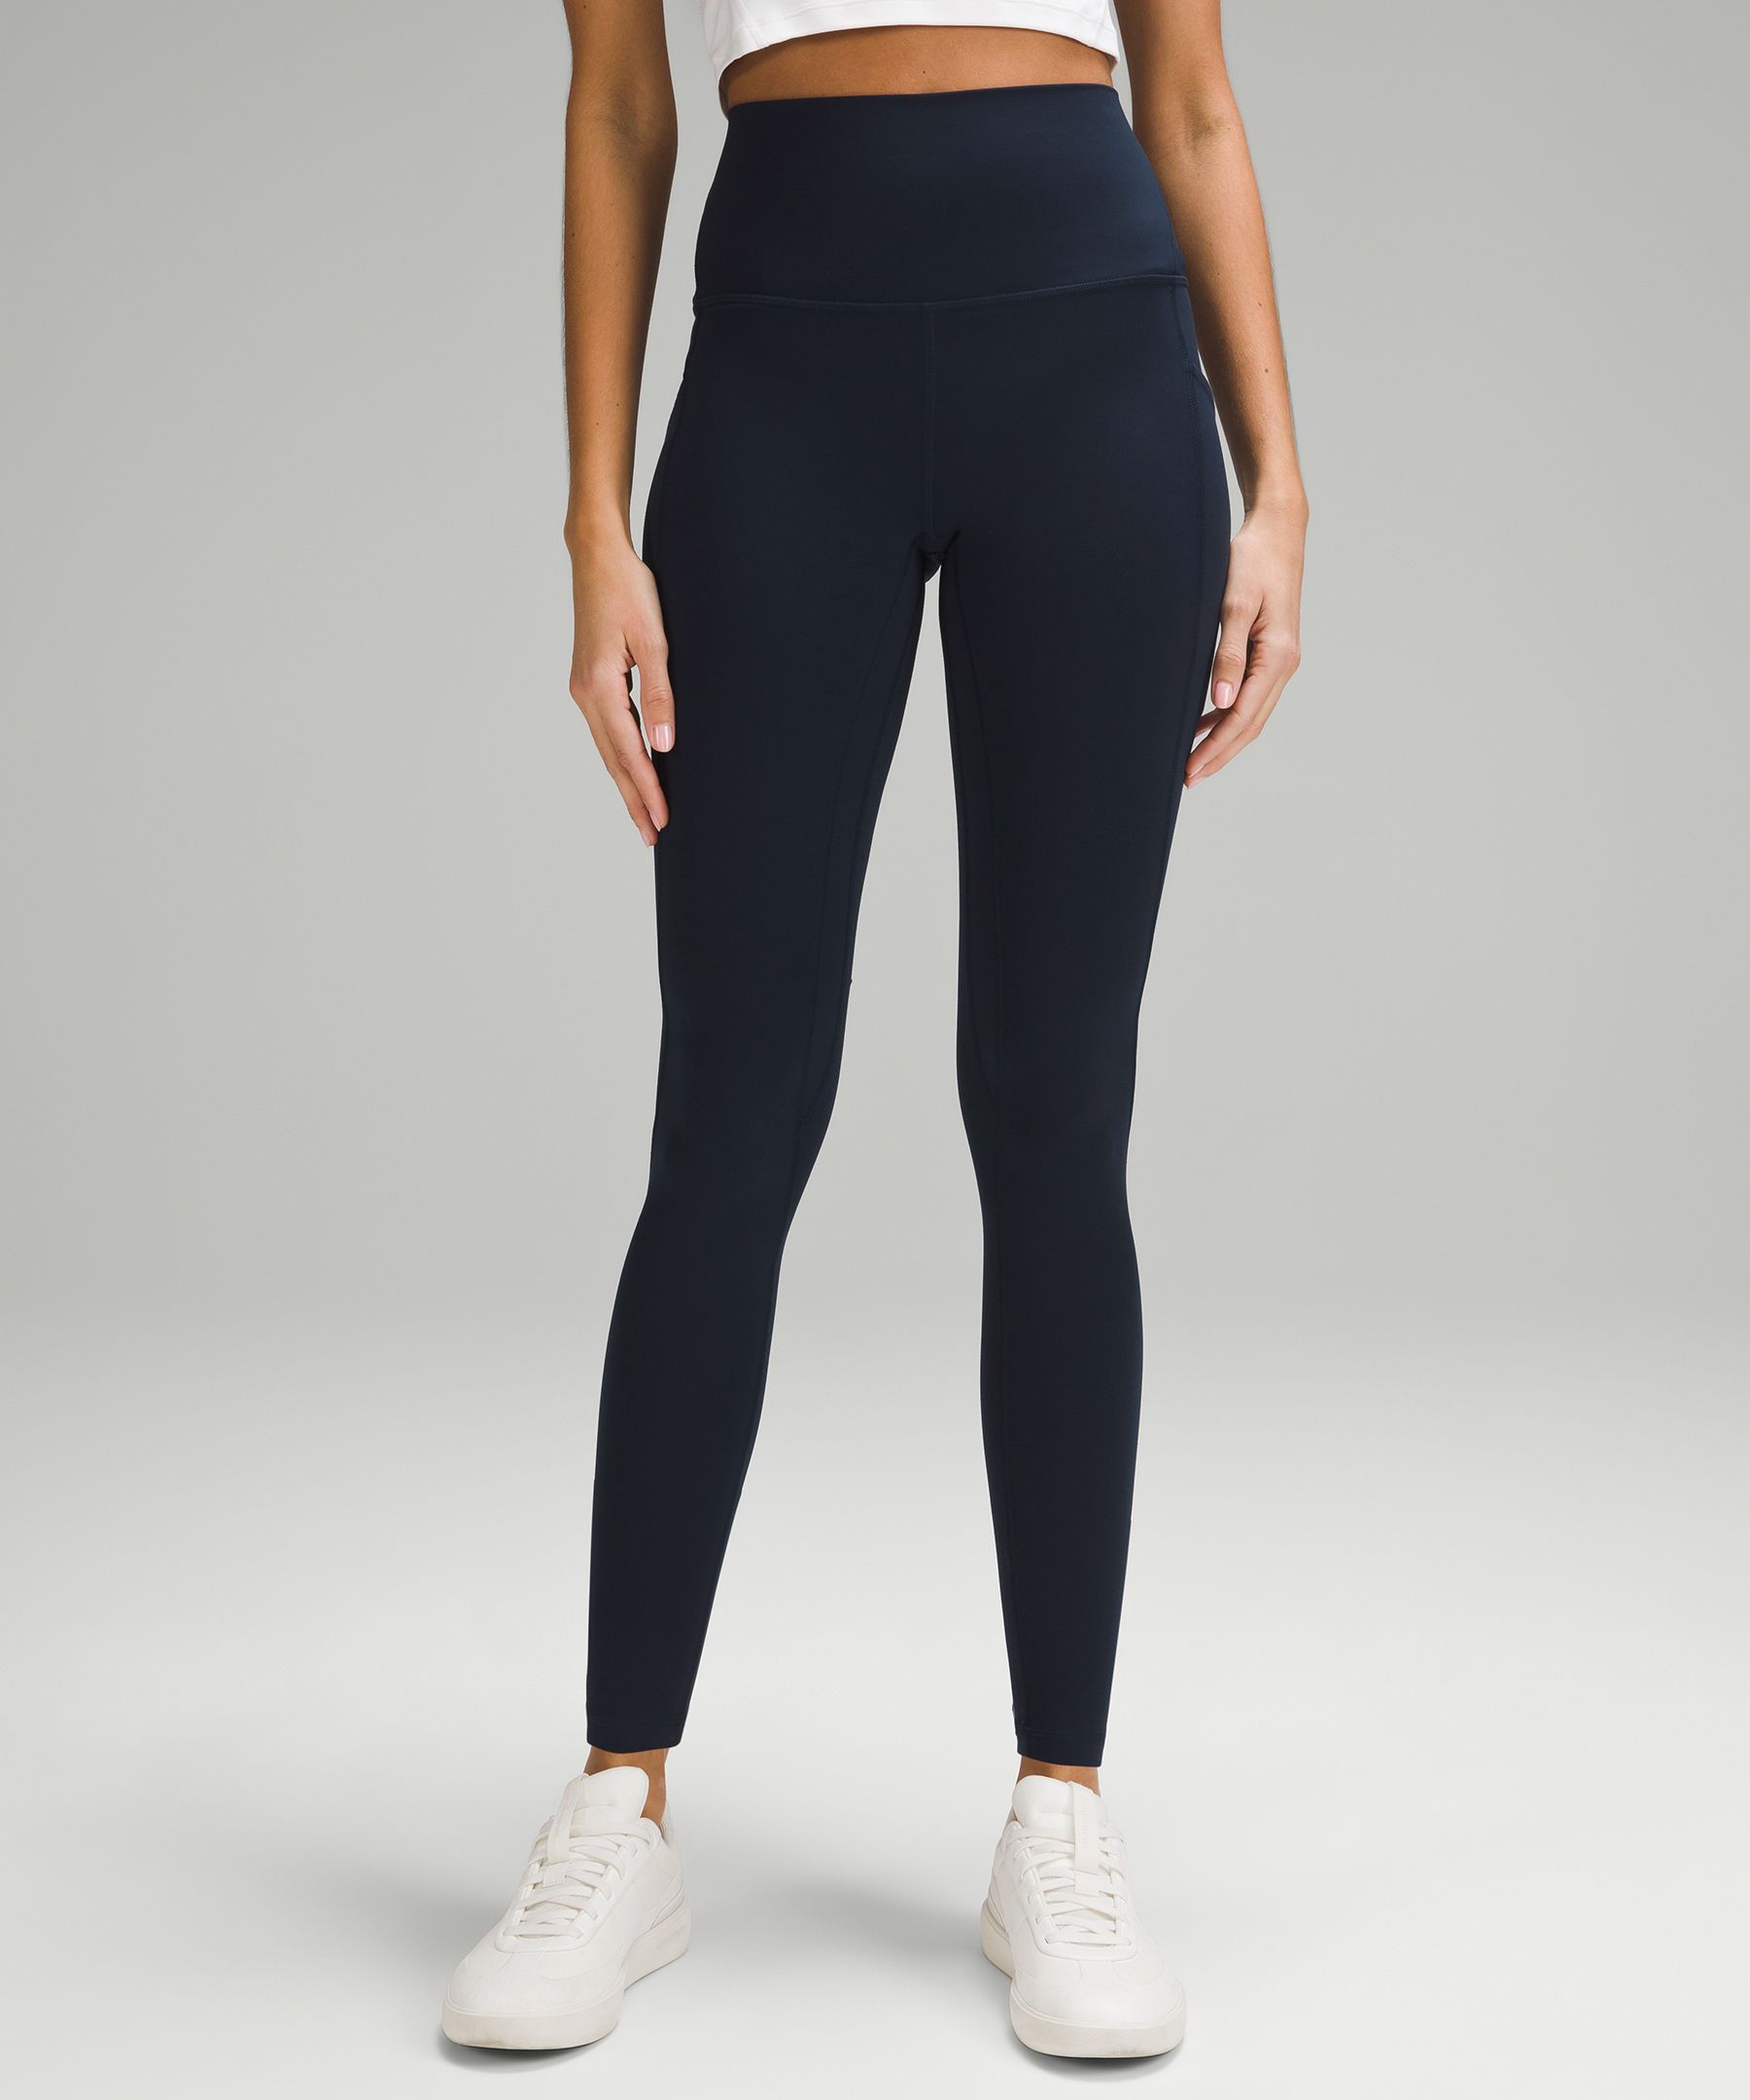 lululemon Align™ High-Rise Pant with Pockets 31, Women's Leggings/Tights